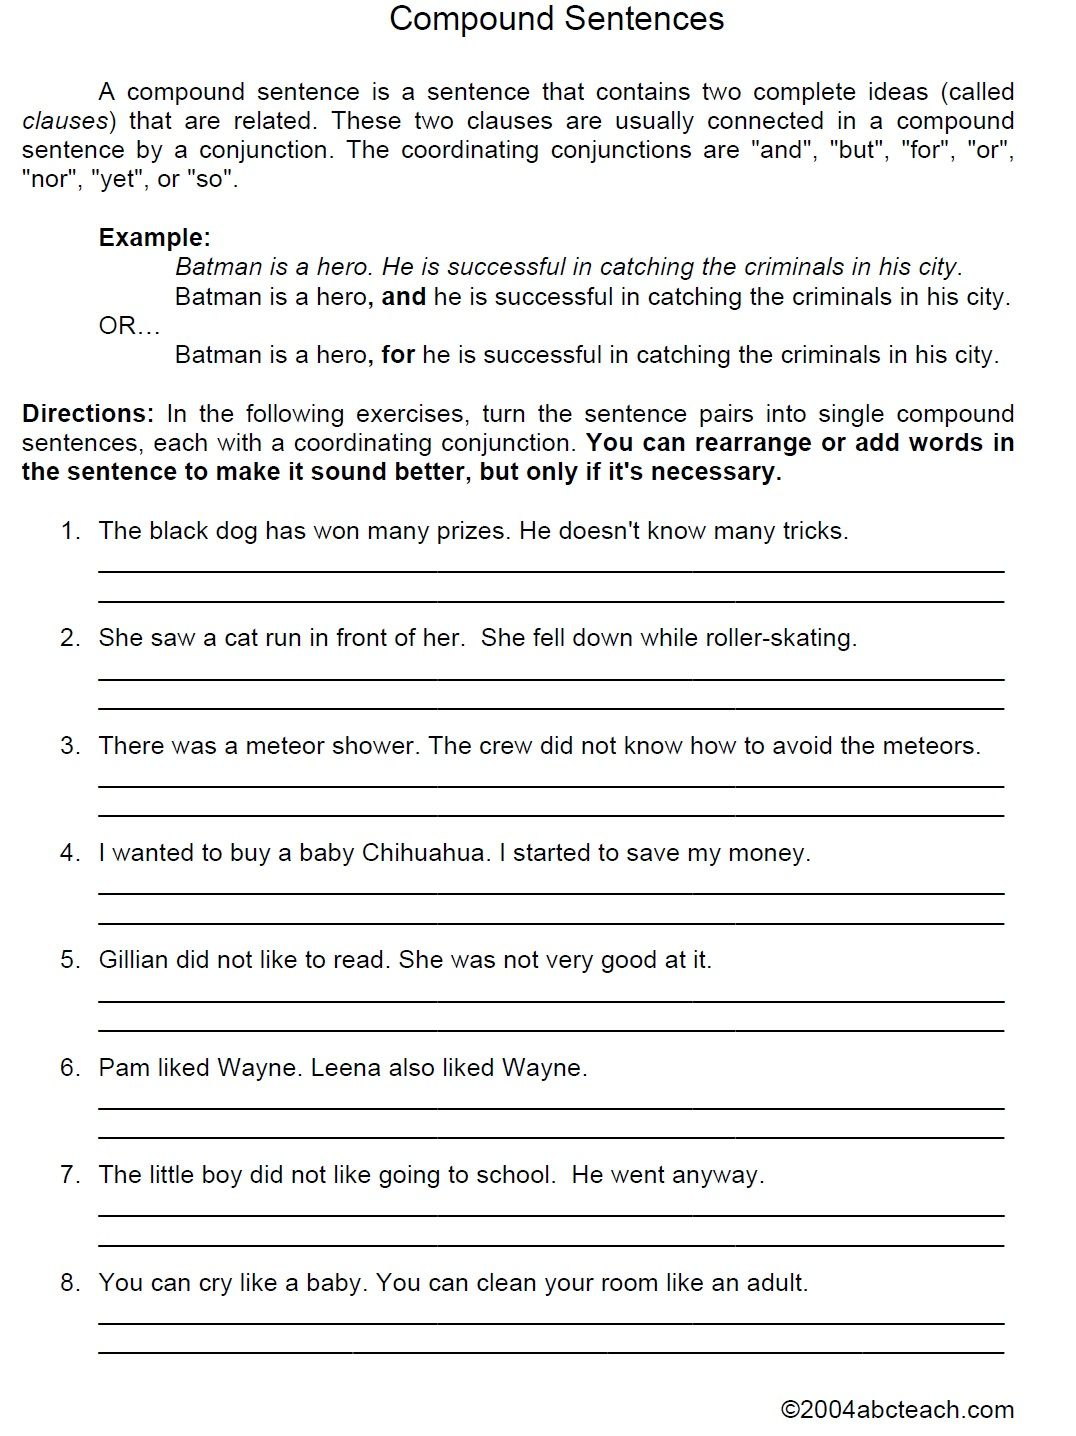 Simple And Compound Sentences Worksheet With Answers